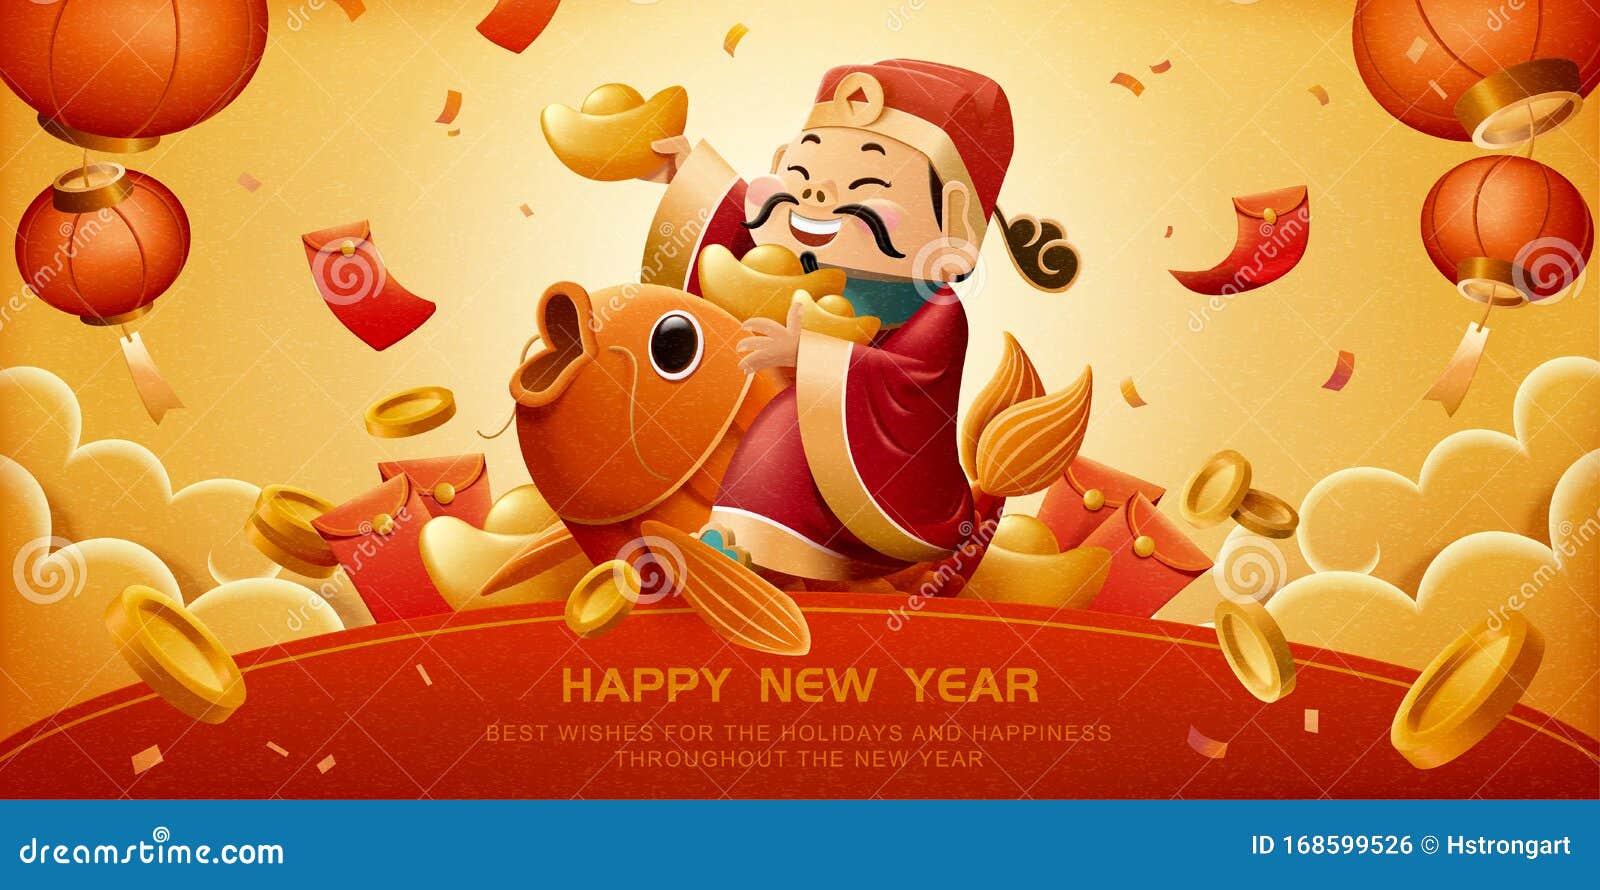 Red Envelope Packet Chinese New Year Hongbao With The Character Happy New  Year On White Background For Chinese New Year Stock Photo - Download Image  Now - iStock